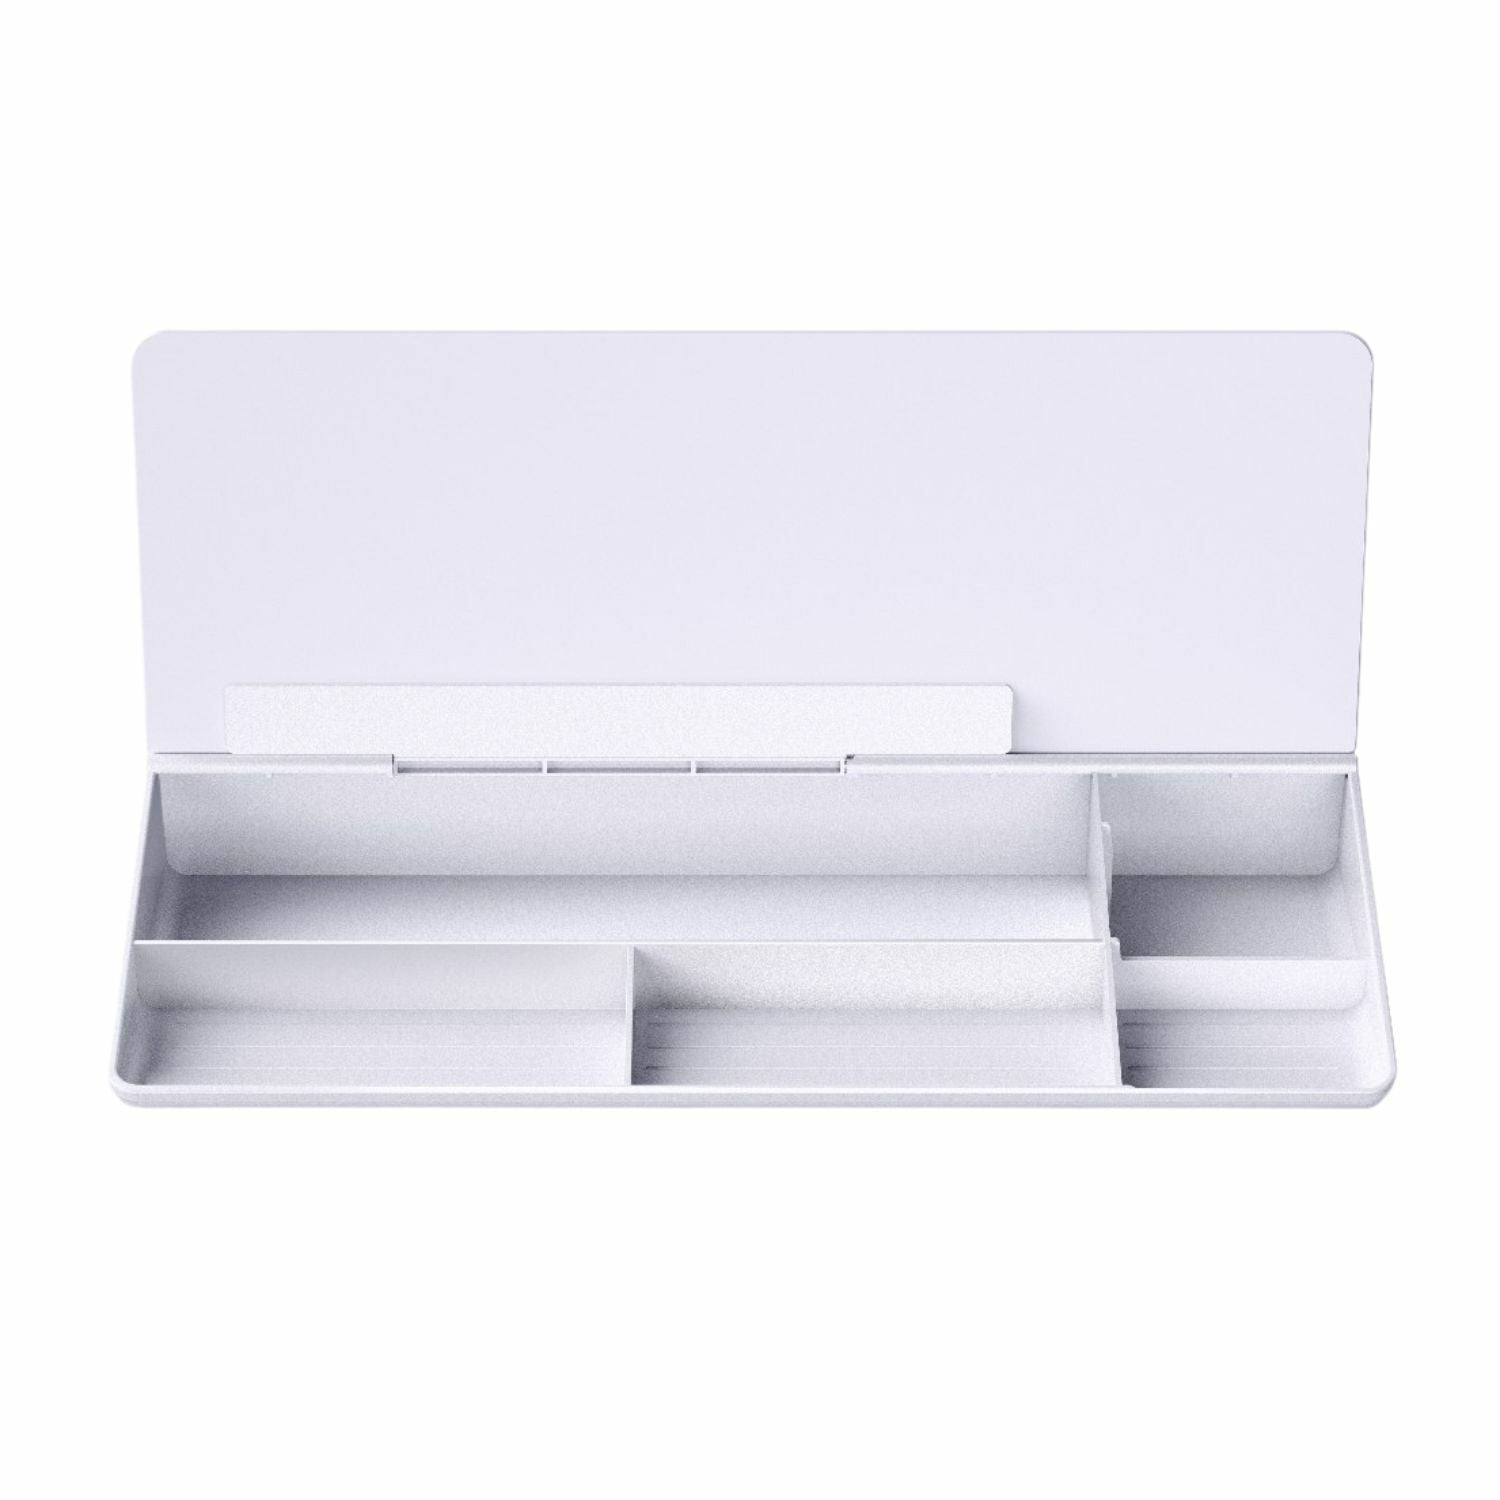 GOMINIMO Multipurpose Desktop Glass Dry Erase Board with Dividers GO-DGB-100-YD